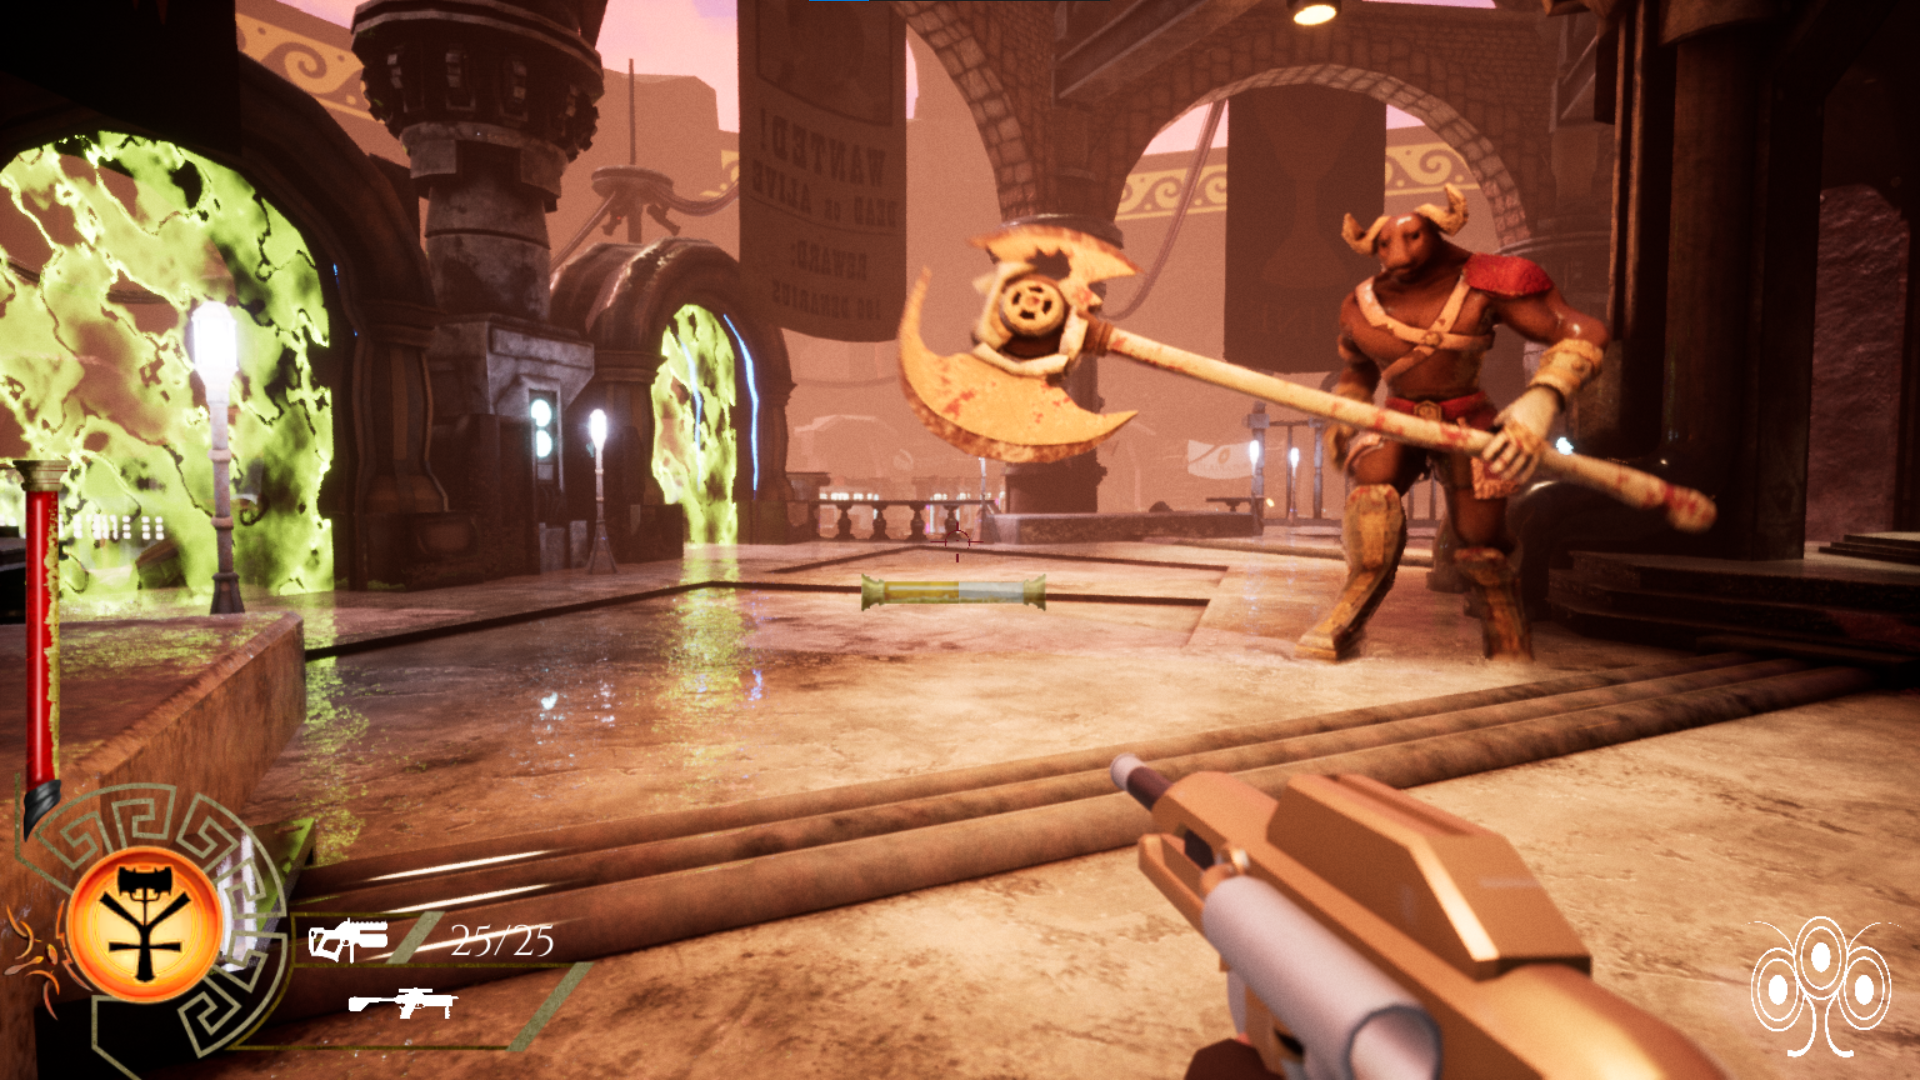 A screenshot of a video game co-developed by Ethan Edelen. It shows the interior of a sprawling, modernized roman colosseum at dusk, with a minotaur present.